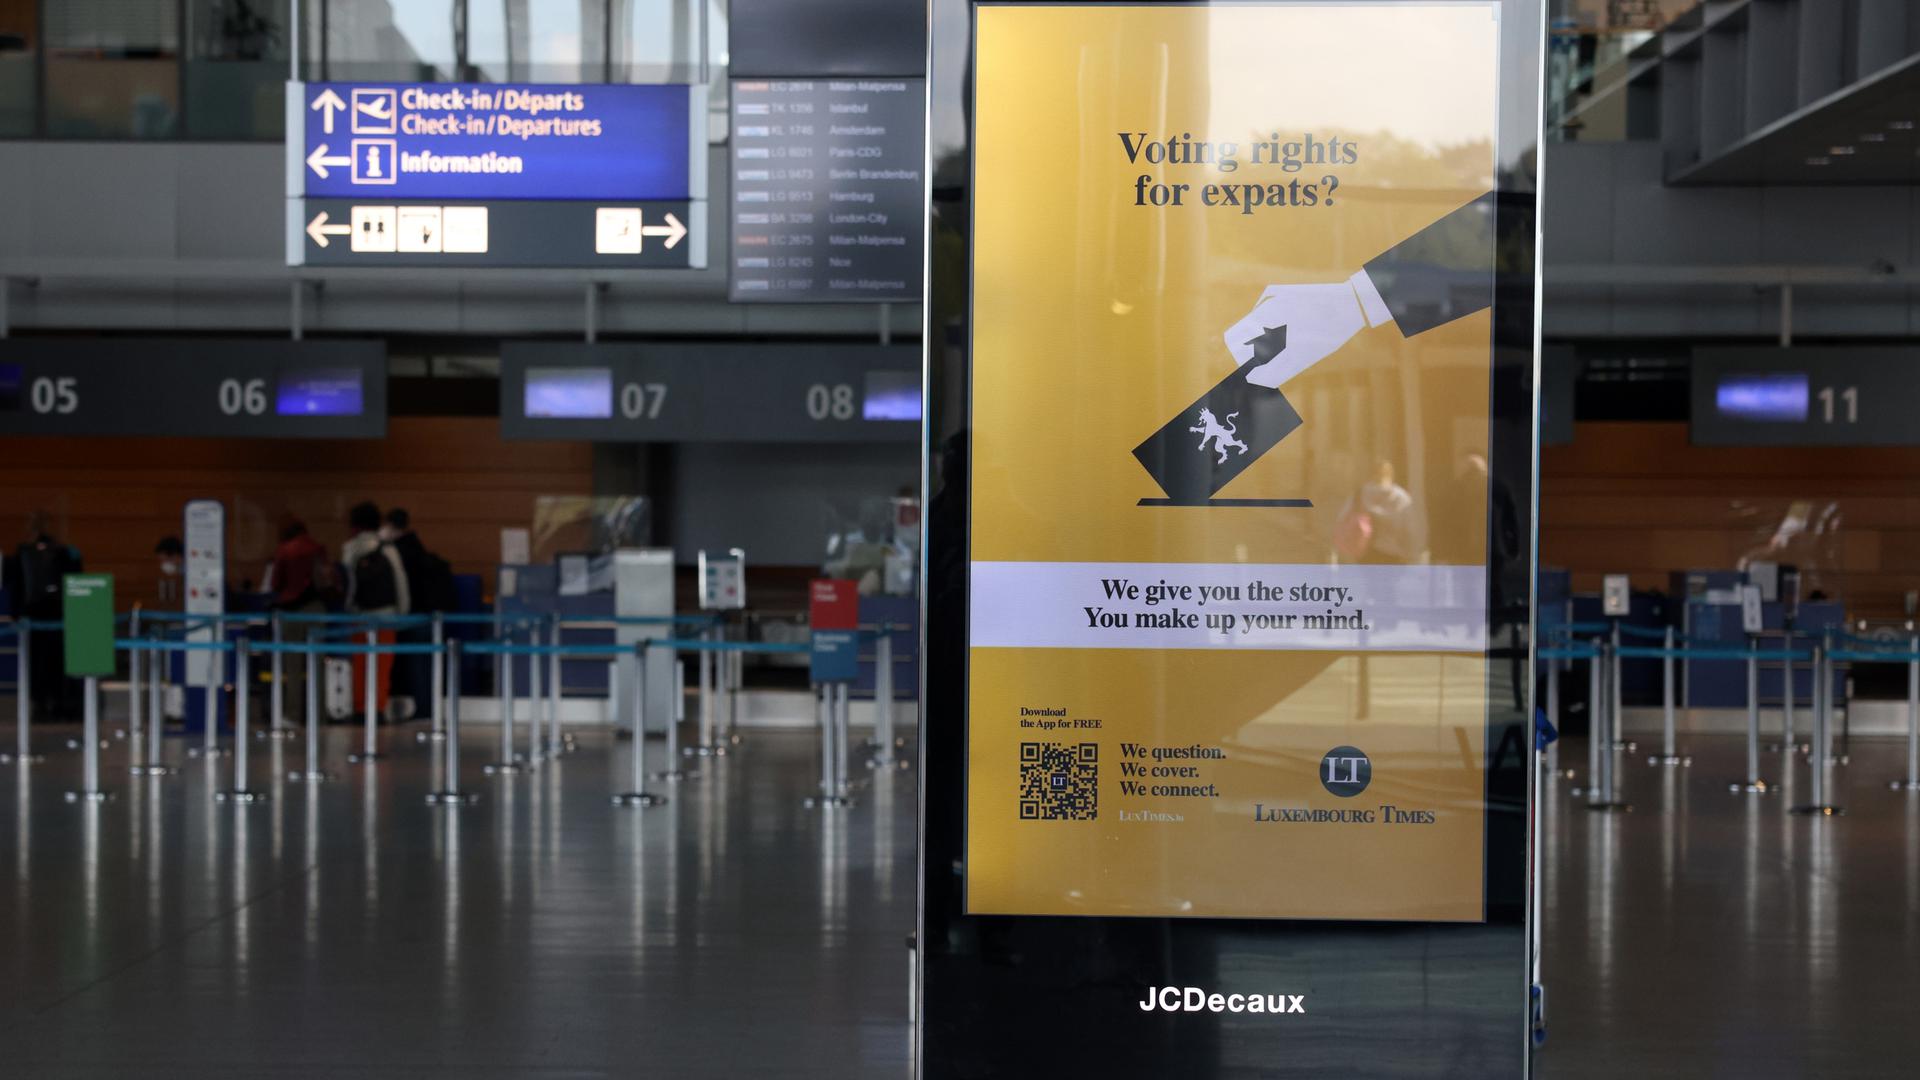 Voting rights for expats are a theme in a Luxembourg Times advertising campaign